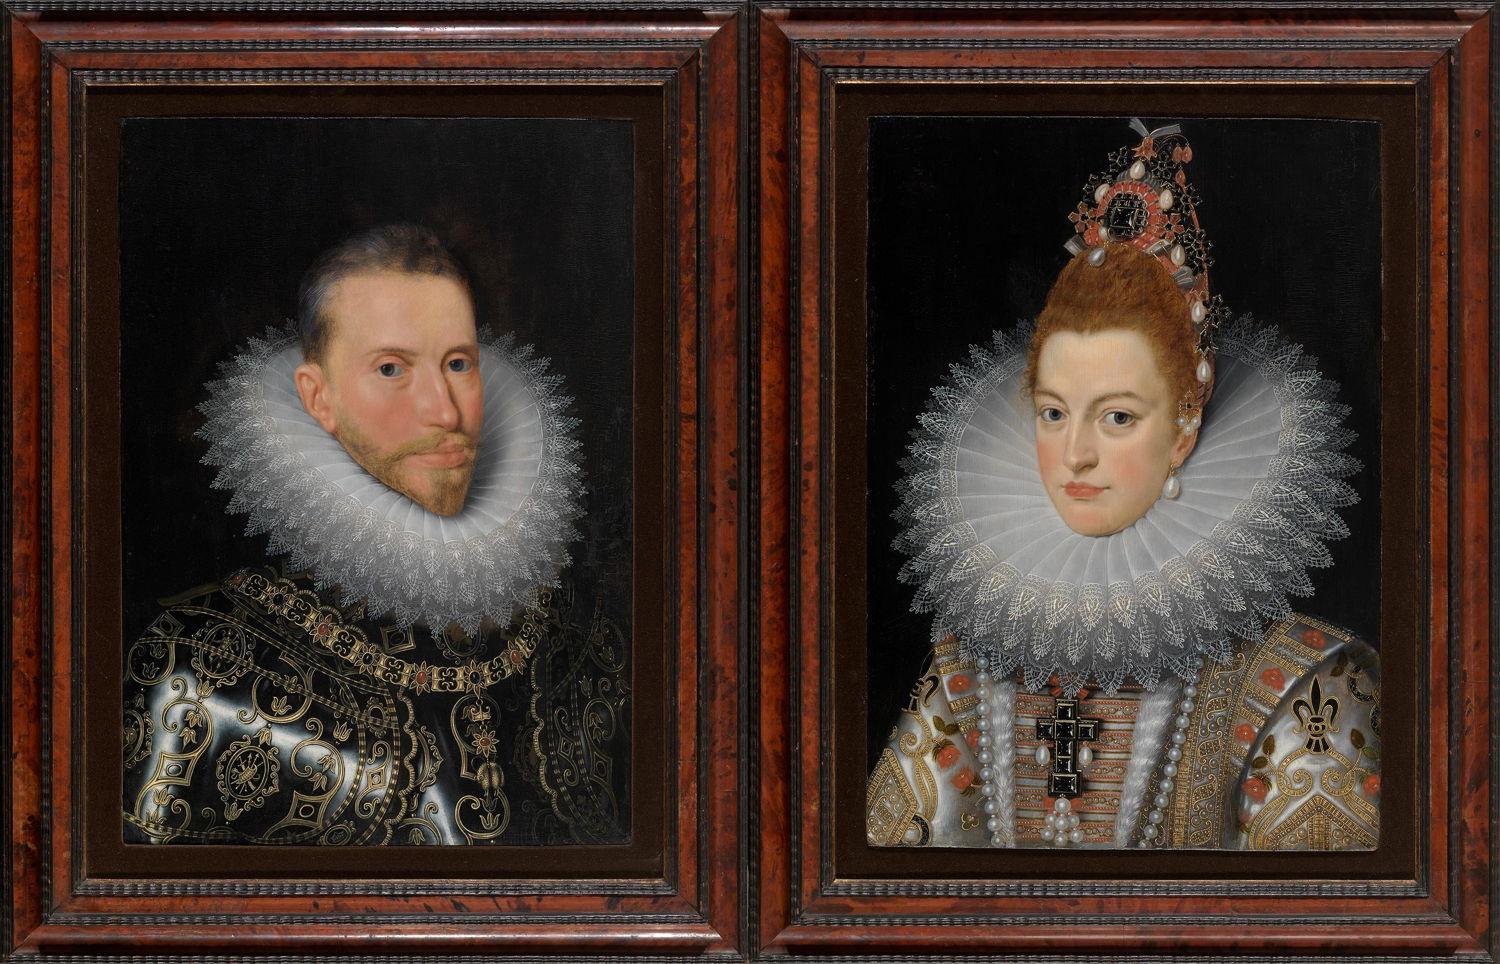 Frans Pourbus II, Portraits of the Archducs Albert and Isabella, Musea Brugge © www.lukasweb.be - Art in Flanders vzw, photo Hugo Maertens